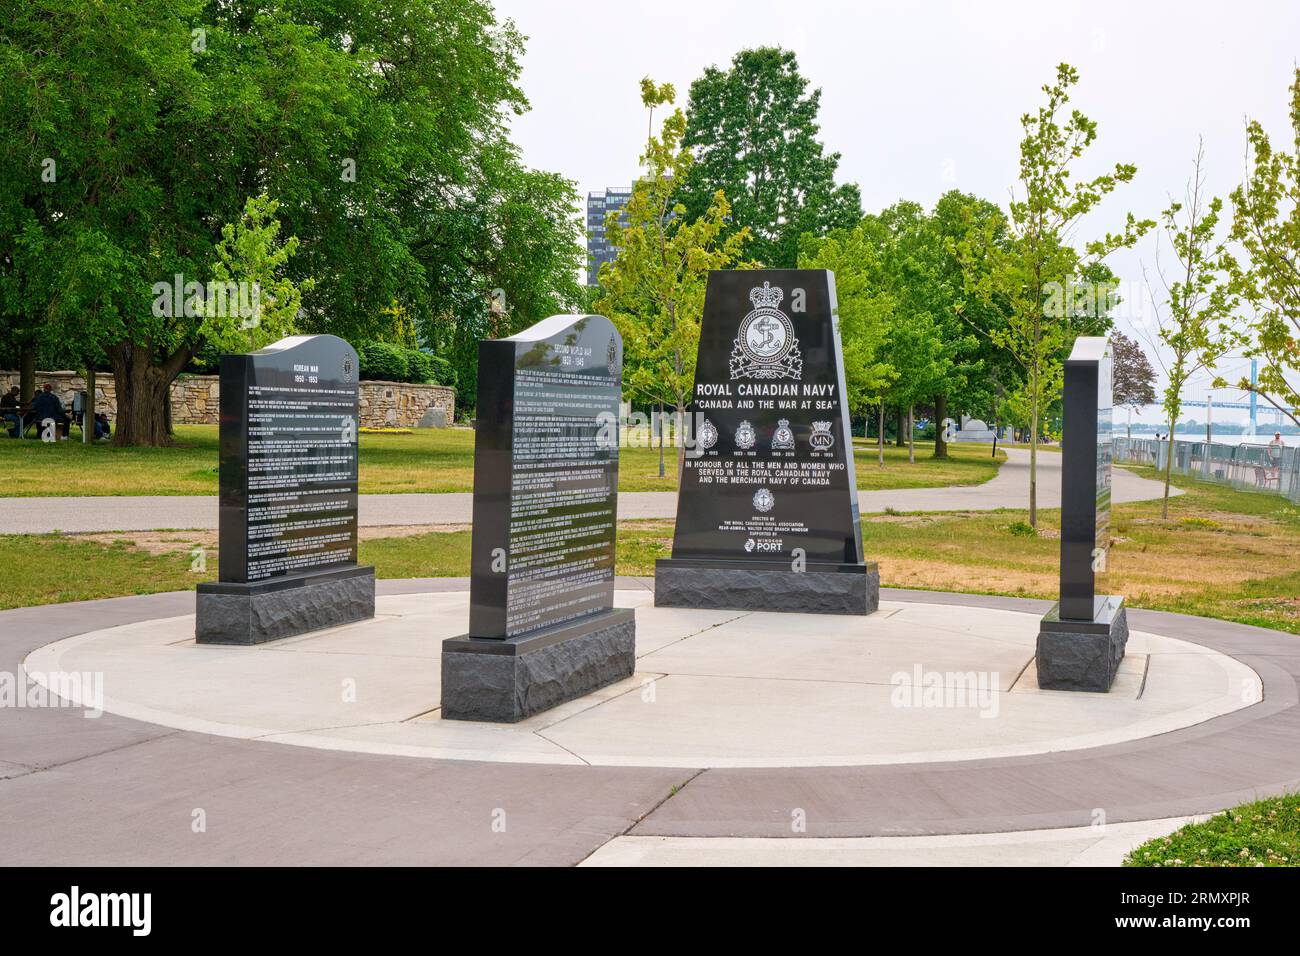 Memorial on the waterfront in Windsor Ontario dedicated to honouring all of the men and women who served in the Royal Canadian Navy and teh Mechant Na Stock Photo